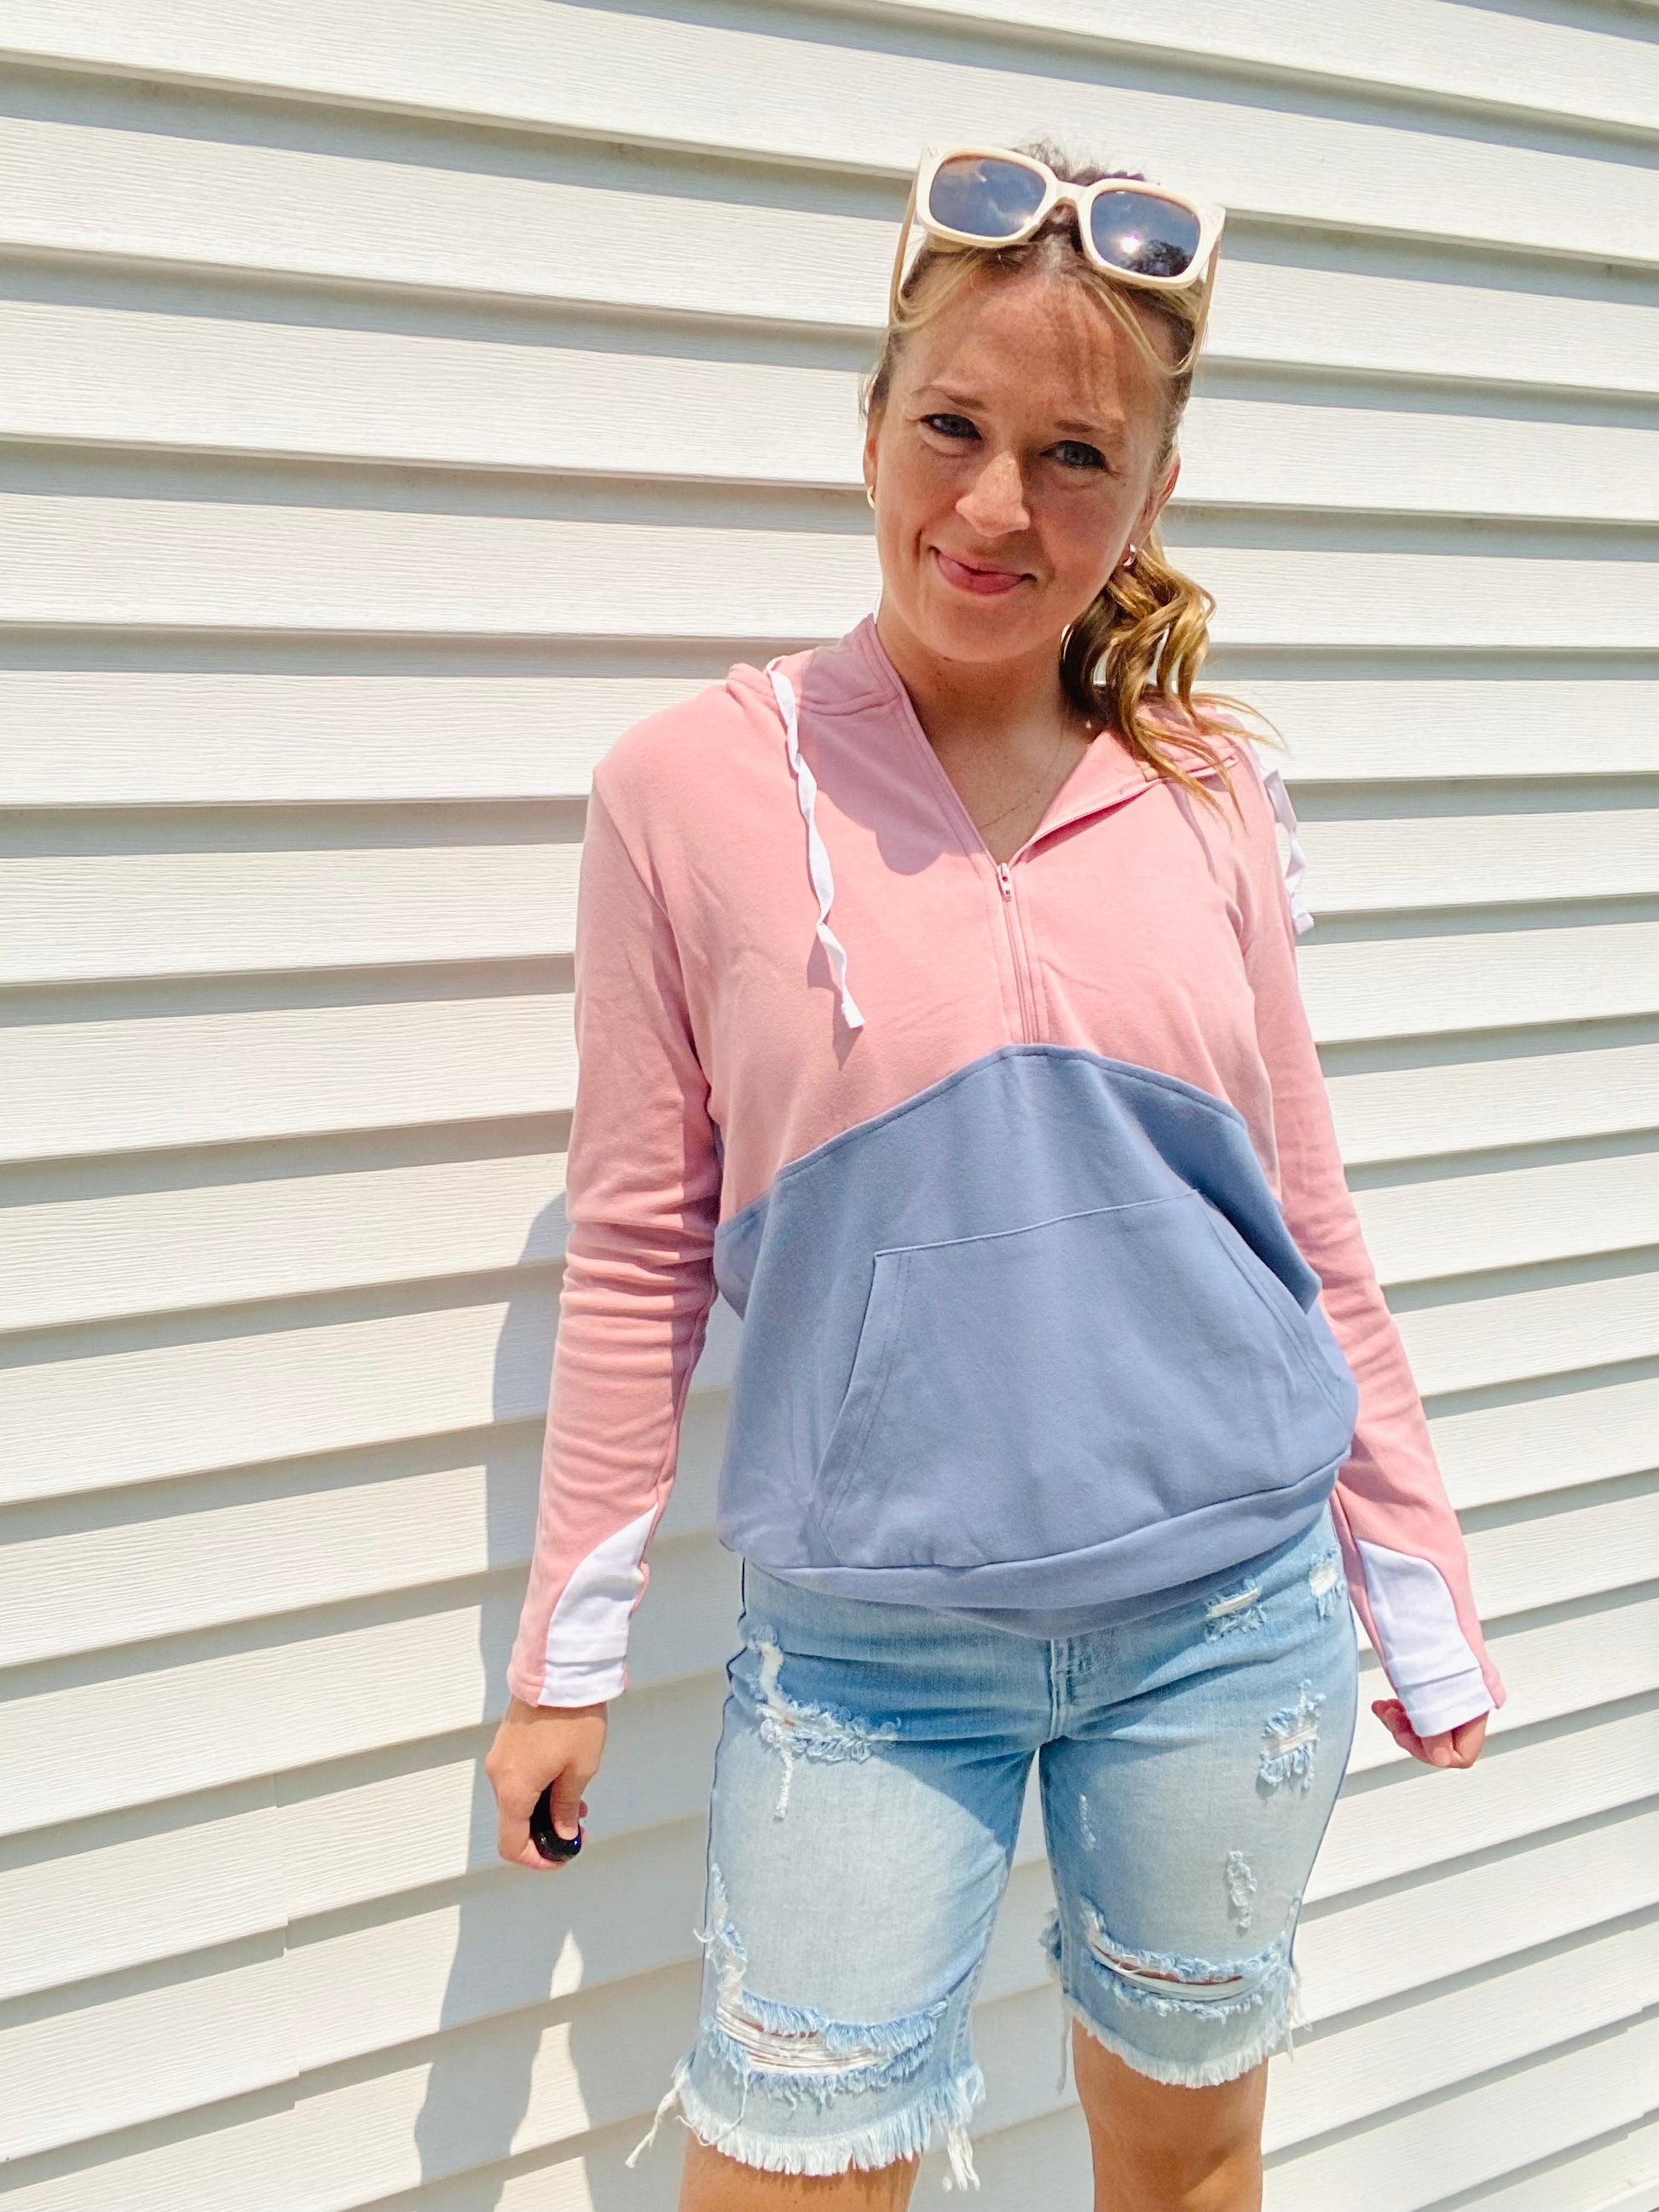 Stay warm and stylish with the Pink and Blue Block Zip Hoodie. Crafted with comfortable materials, this hoodie features contrasting colors, a half zipper, white cuff accents, and an oversized hood. Perfect for chilly days and nights - stay cozy in style!